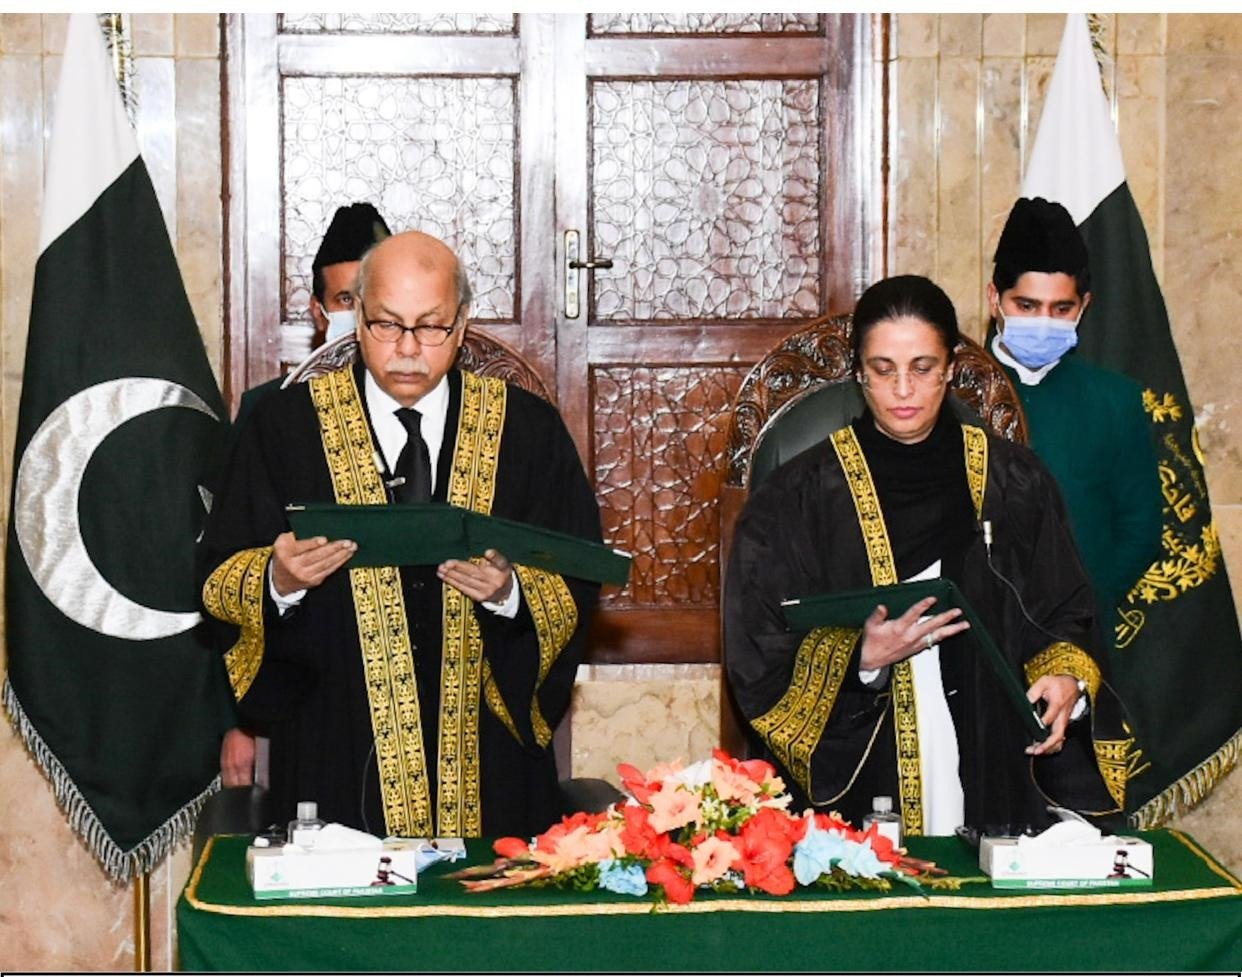 Justice Ayesha Malik takes oath as the first female Supreme Court Judge of Pakistan